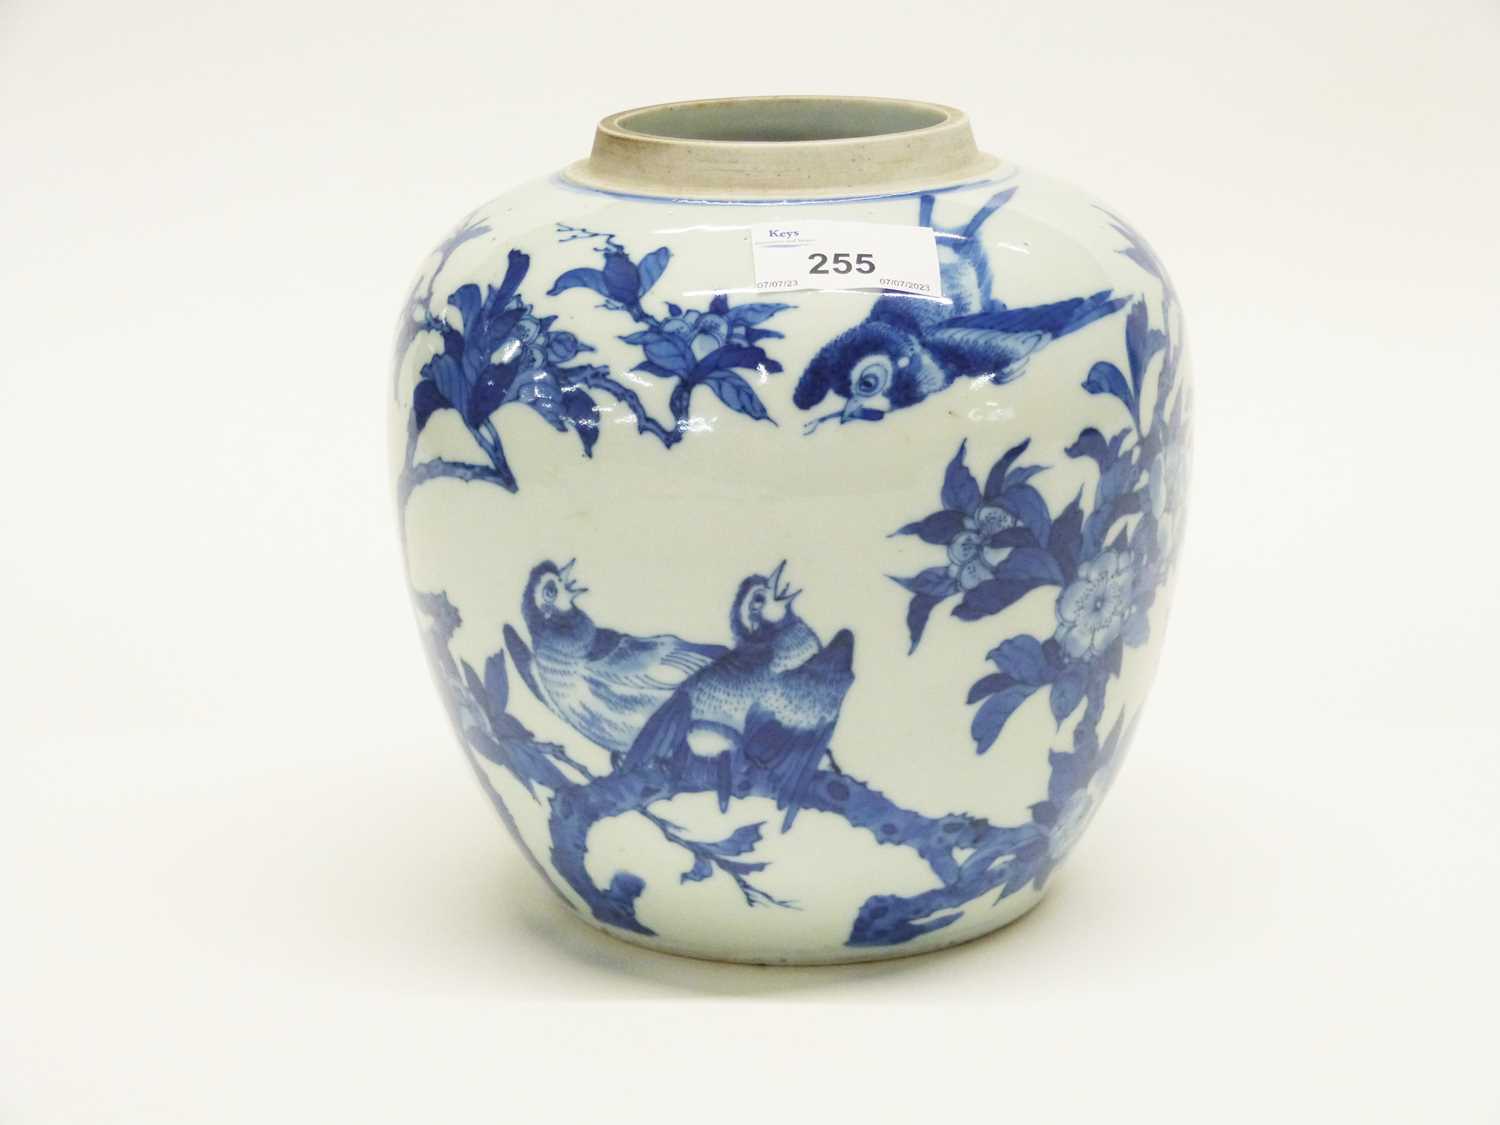 Qing Dynasty Chinese porcelain ginger jar (lacking cover), decorated in blue and white with birds on - Image 2 of 9